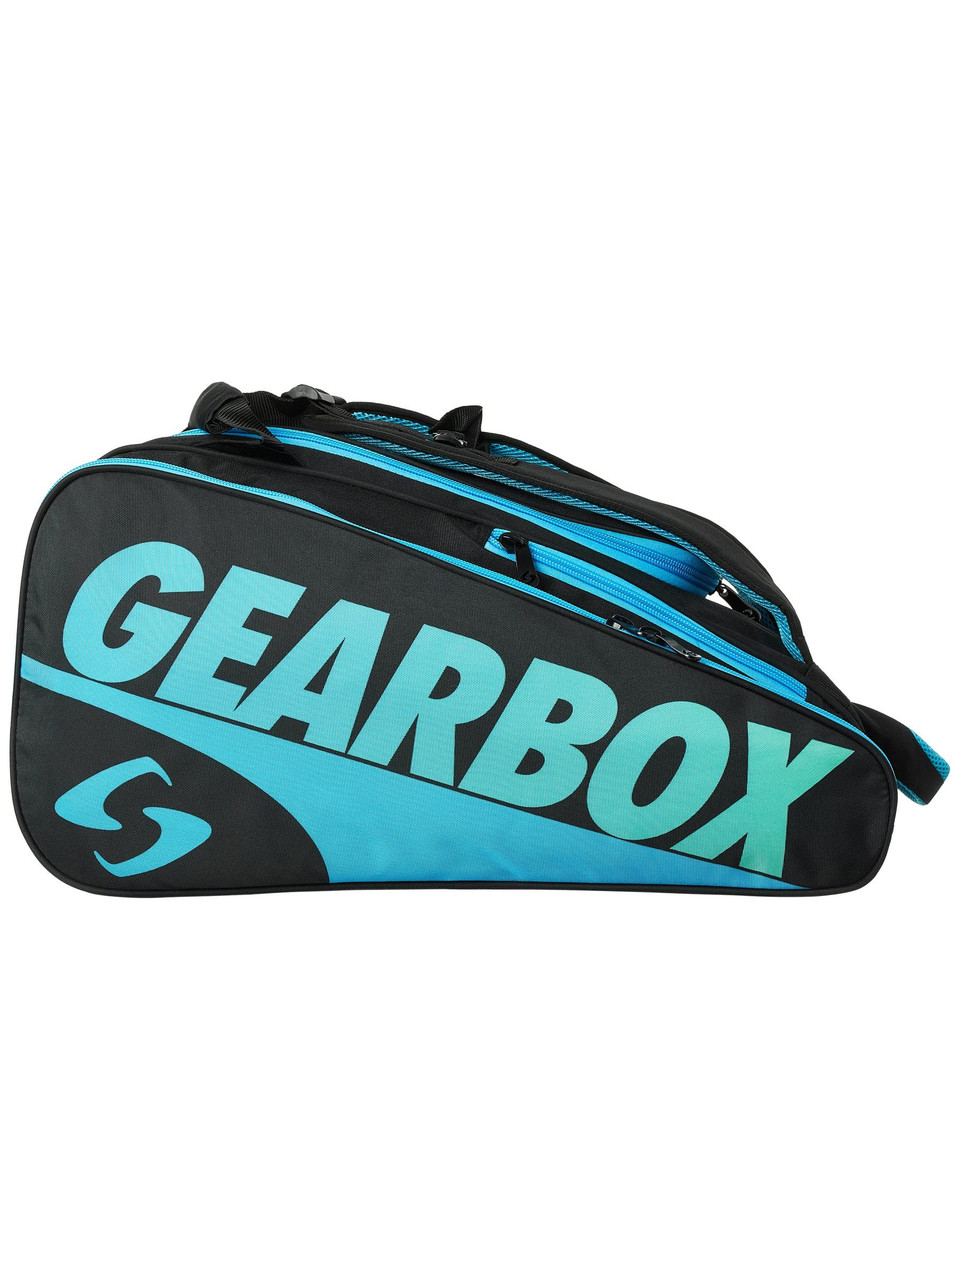 Gearbox Ally Bag Blue/Green 